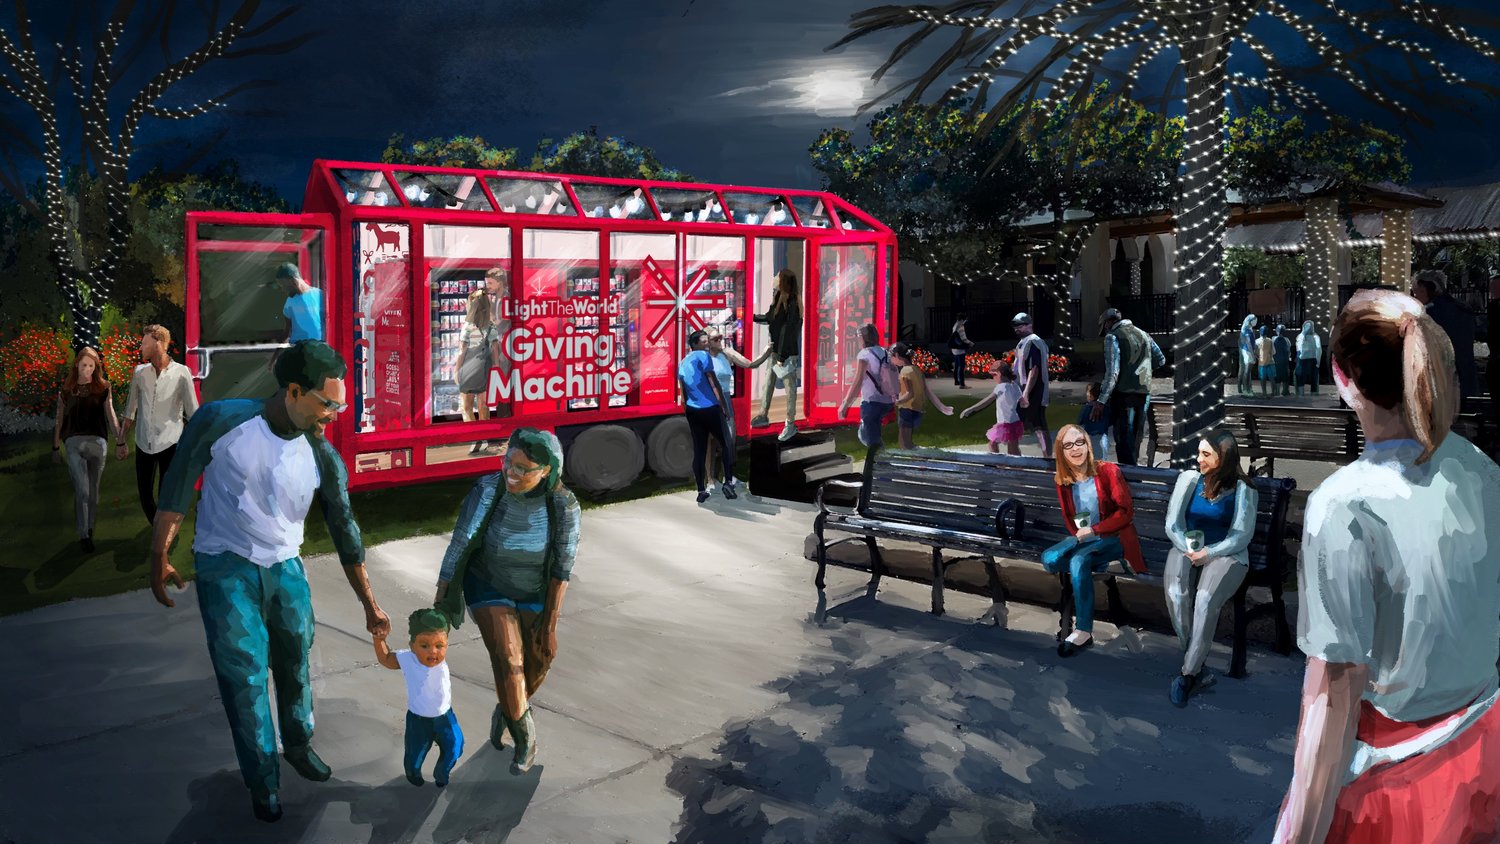 An artist’s rendering of the Light the World Mobile Giving Machine that will be at the St. Augustine Visitor Center on Nov. 25-29. It is a reverse-vending machine that provides items for those in need.